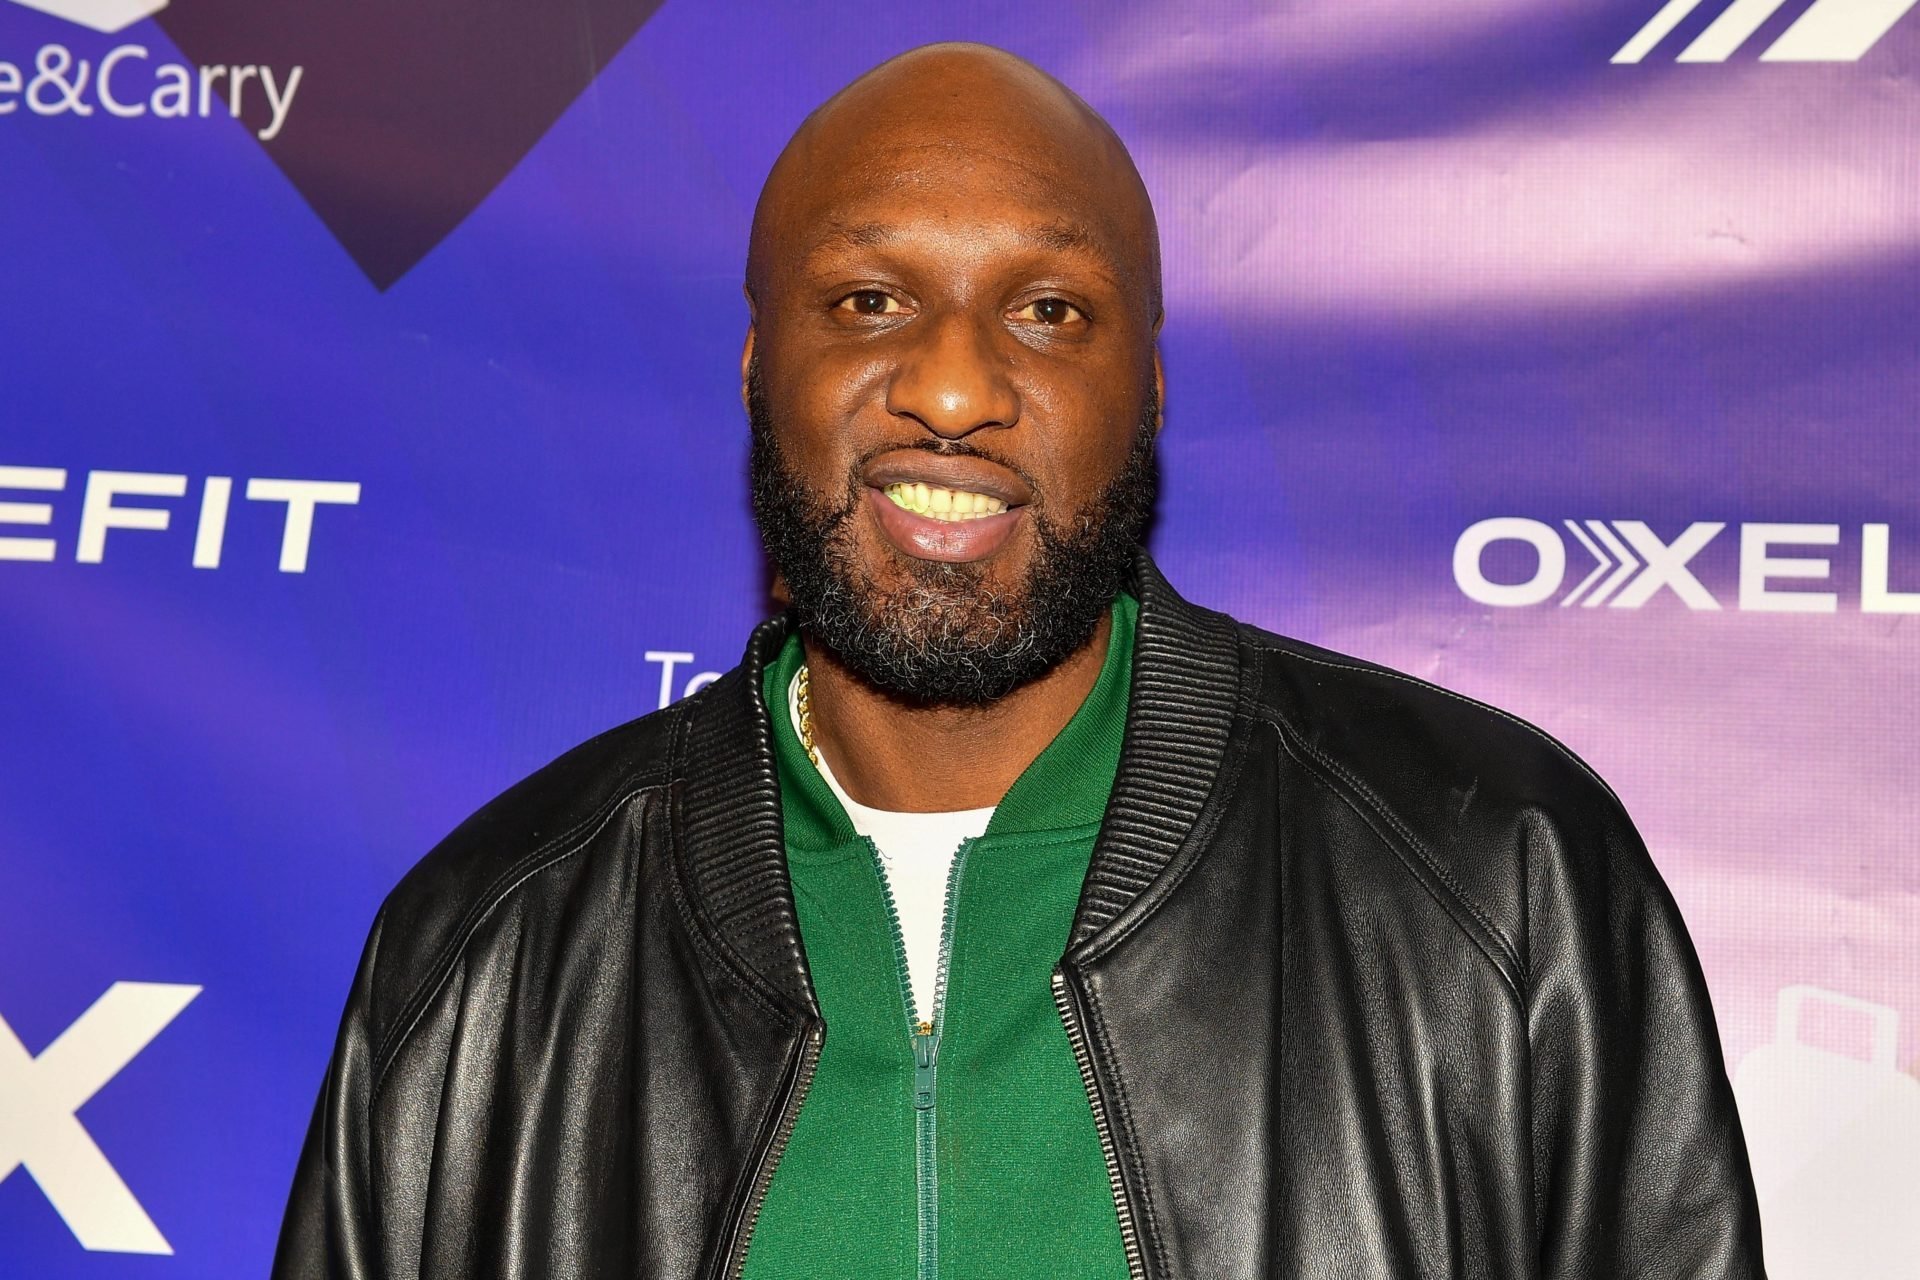 Lamar Odom teases new ink 3 years after Khloe K's initials removed